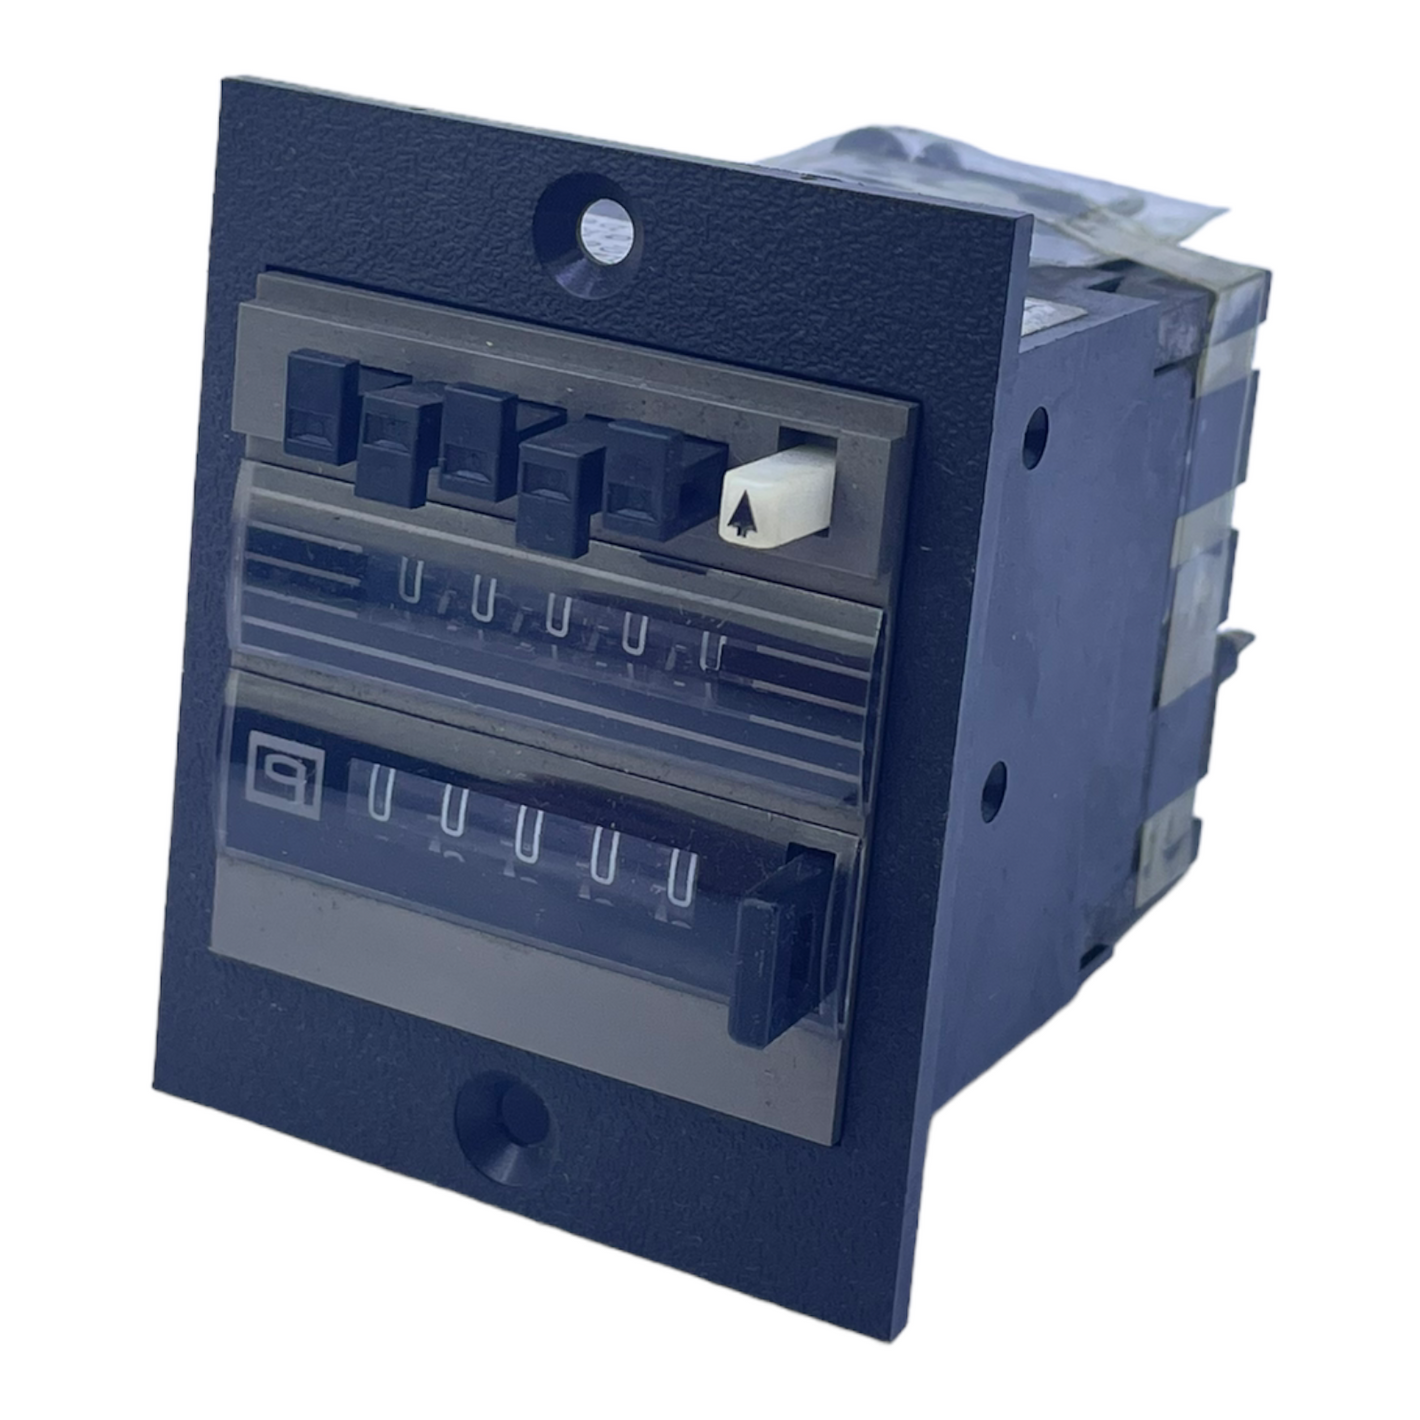 Kauer setting counter 5-digit for industrial applications